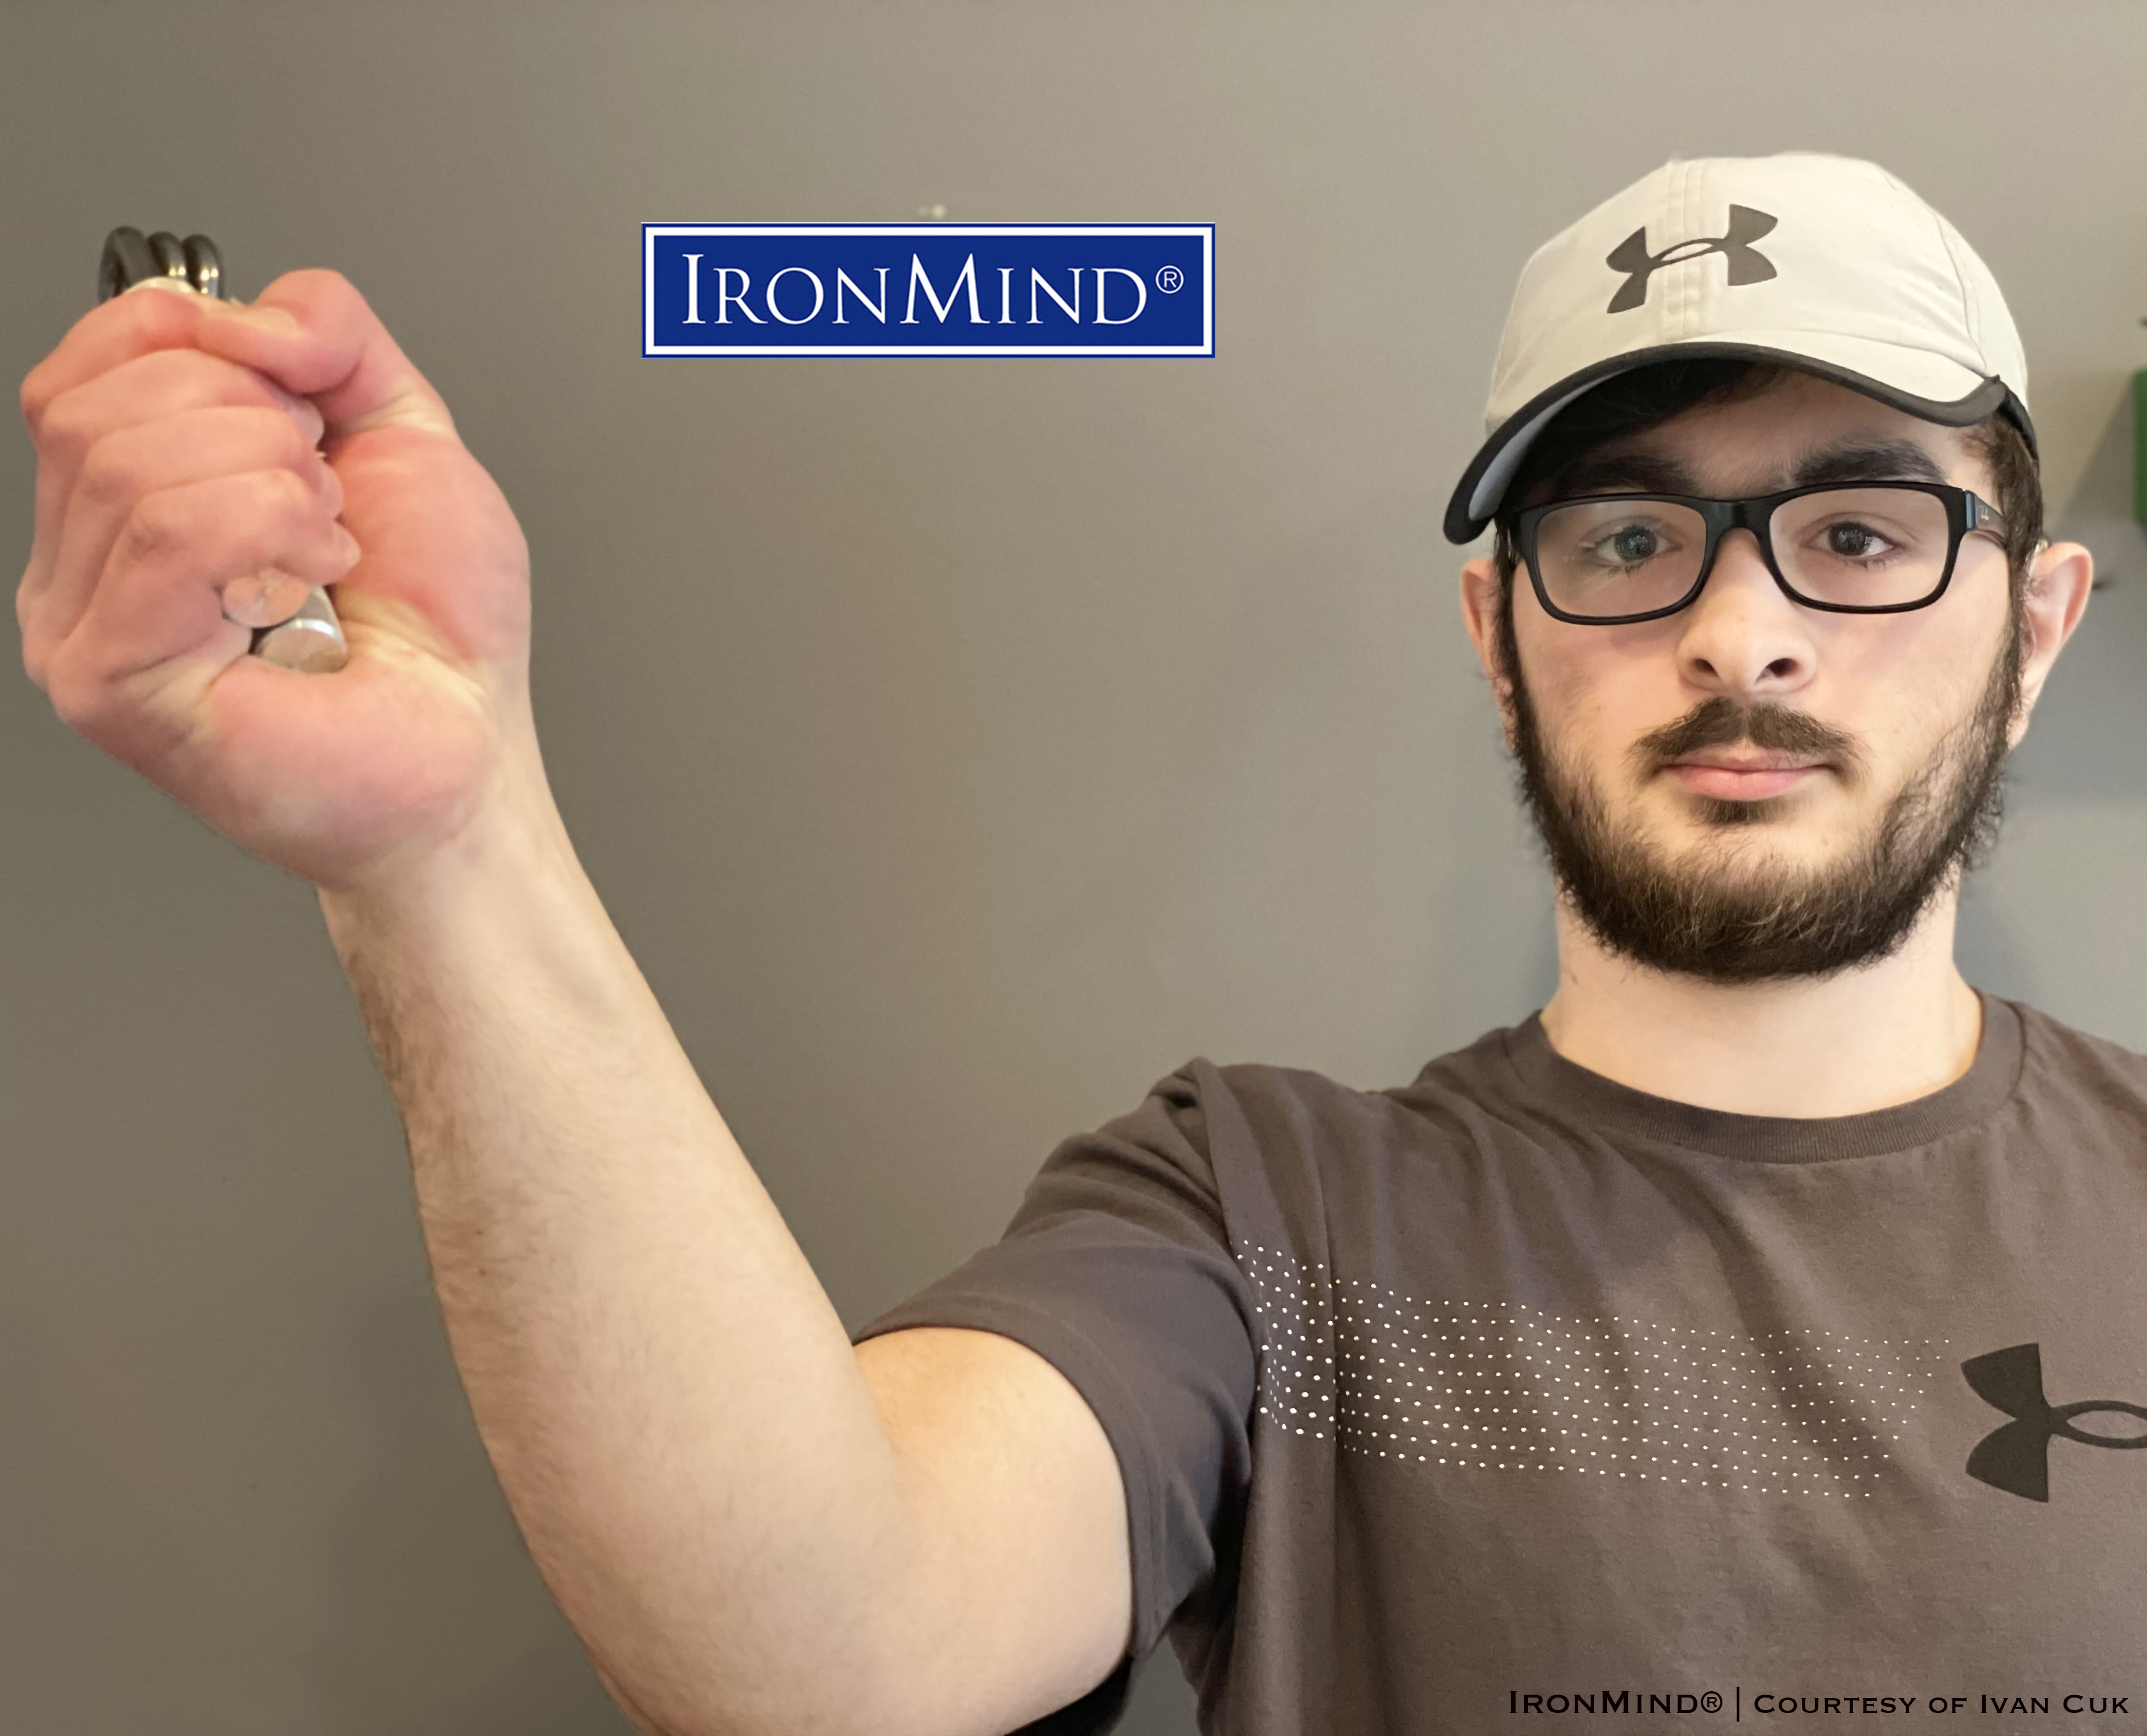 He’s 18 and has certified on the IronMind Captains of Crush No. 3 gripper: Ivan Cuk is 6 feet tall and weighs 185 lb. IronMind® | Courtesy of Ivan Cuk